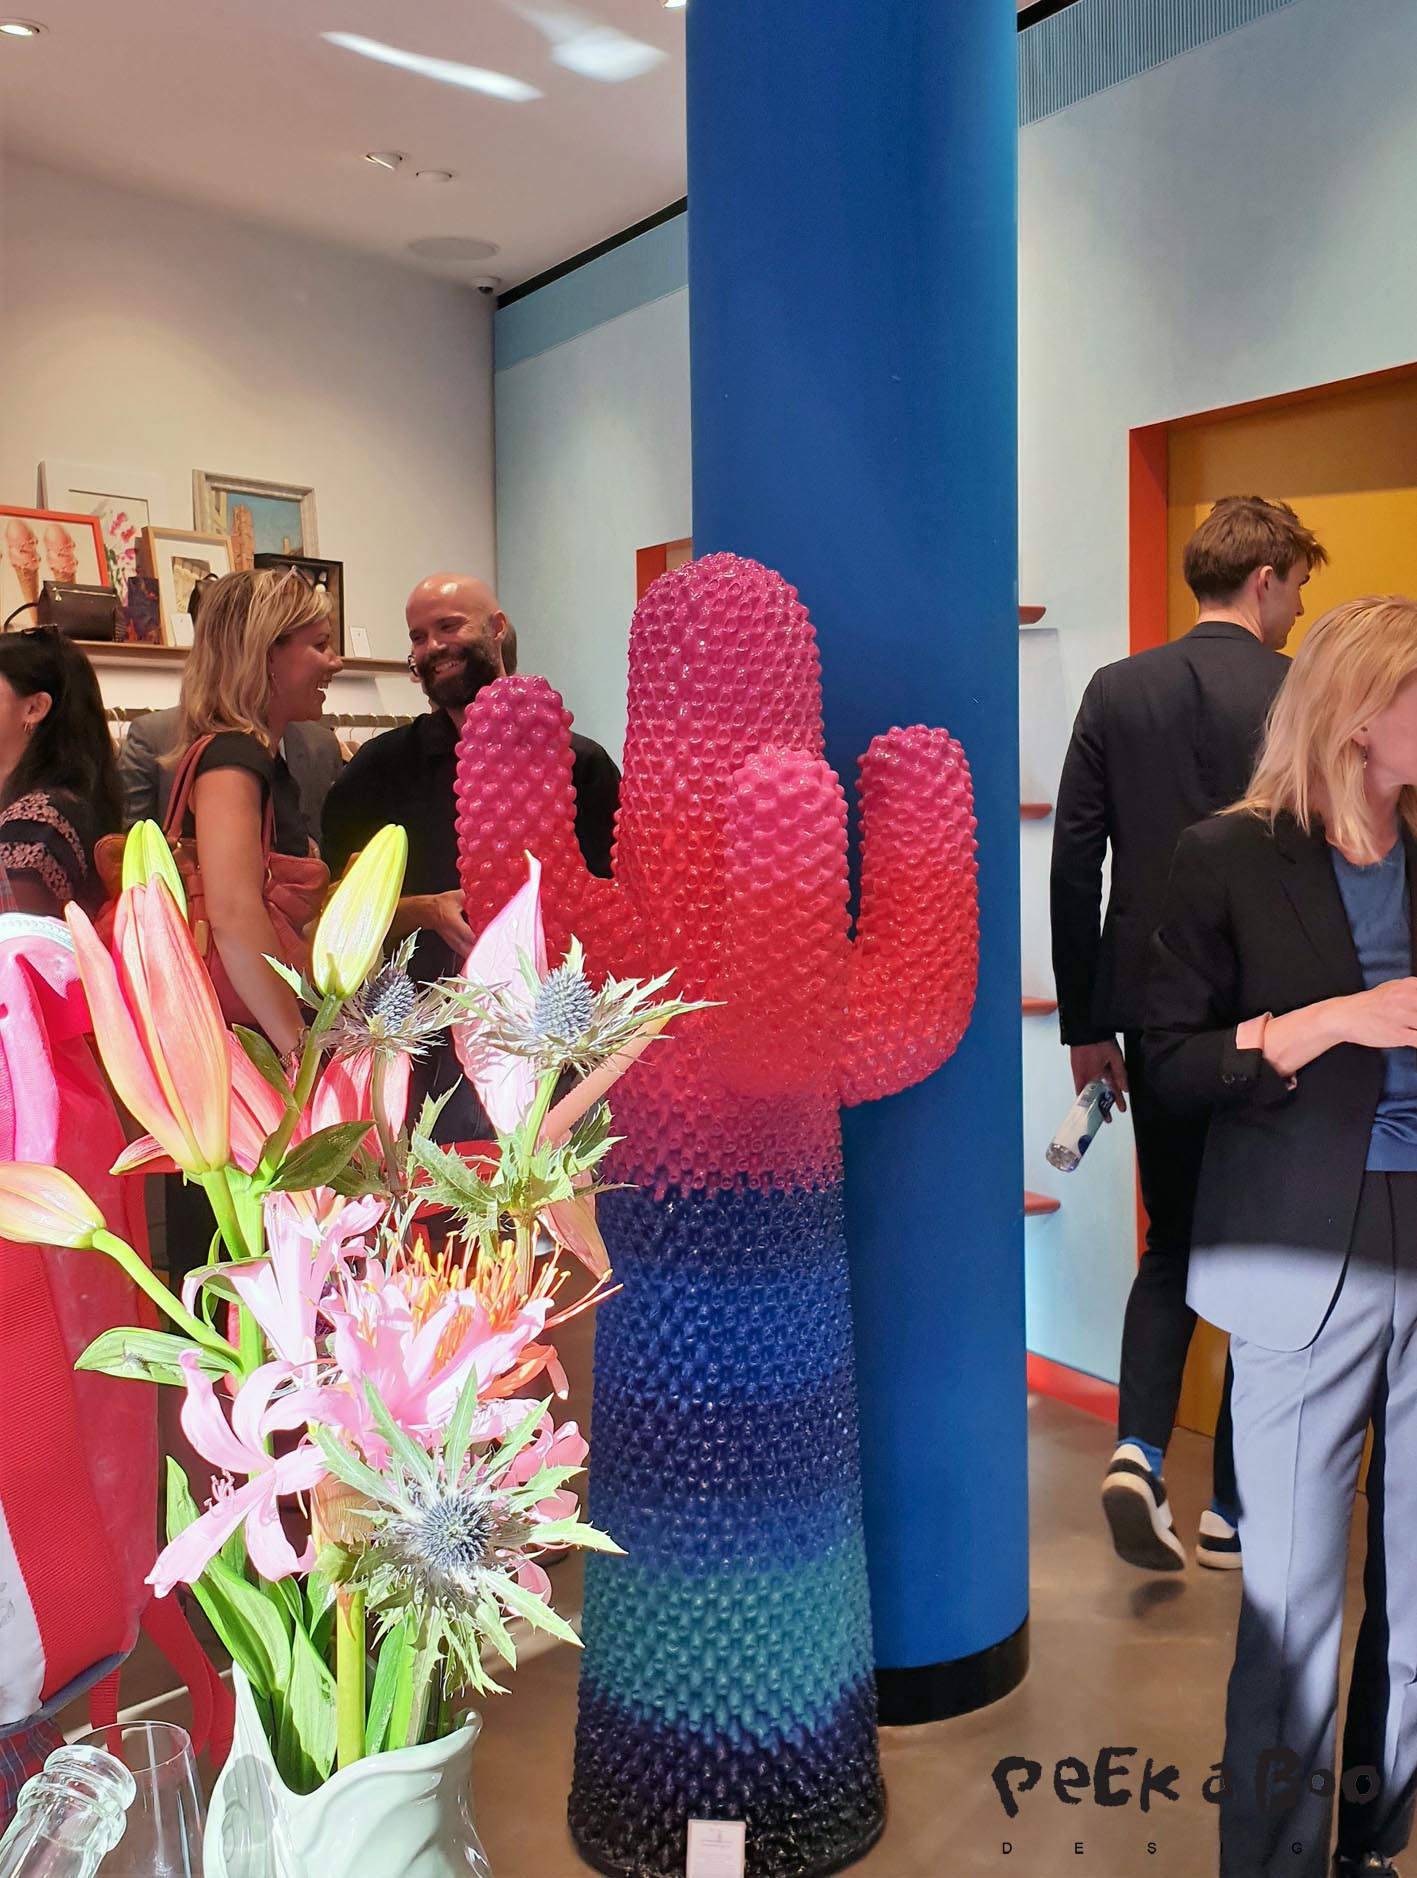 This Cactus in ceramic is also for sale in the store. It is a special limited edition of the iconic Gufram Cactus. Gufram & Paul Smith Psychedelic cactus combines Gufram's irrelevent coat hanger with the unmistakable colourful pattern of Paul Smith.